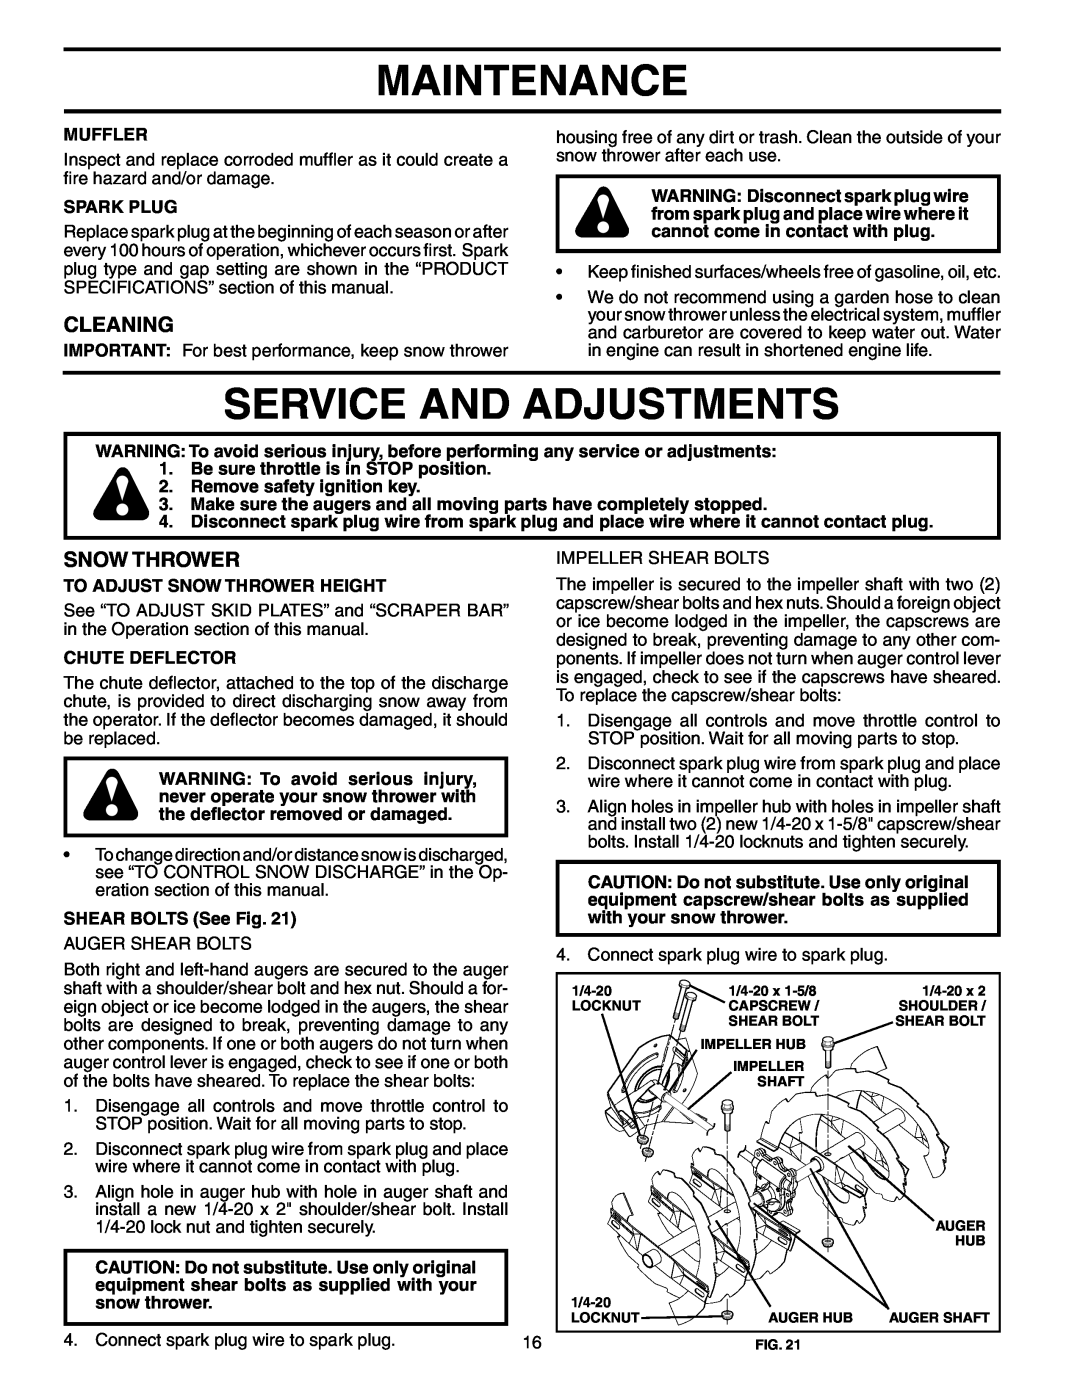 Poulan PO8527ESA owner manual Service And Adjustments, Cleaning, Maintenance, Snow Thrower 